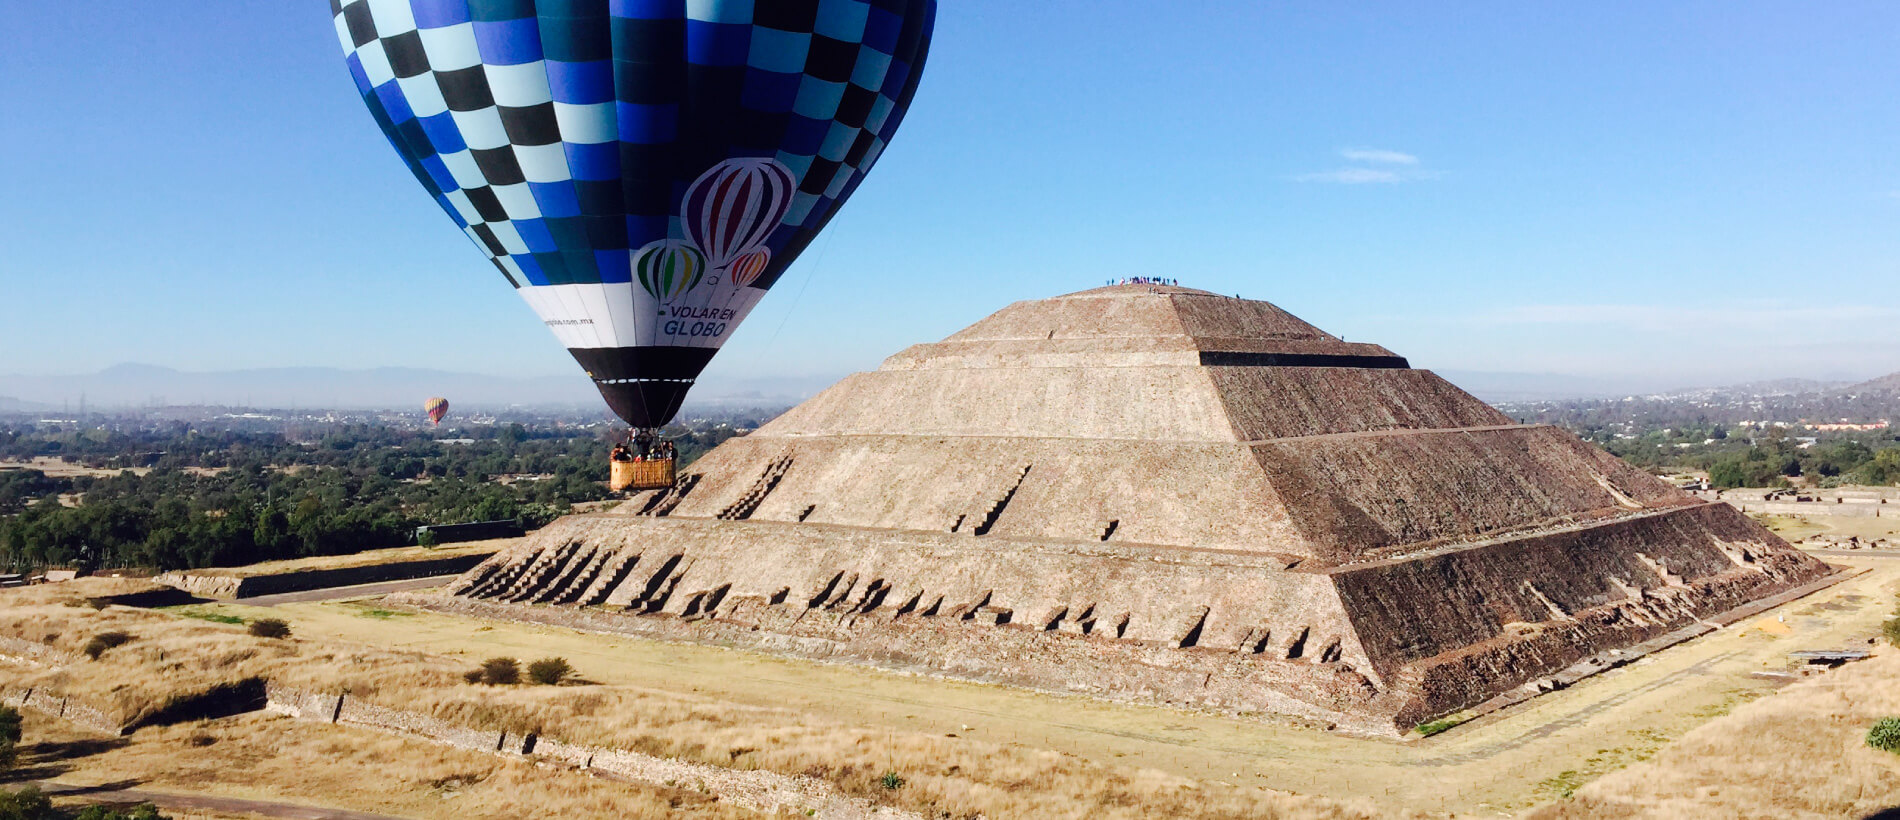 Hot Air Balloon Ride and Teotihuacan Tour with Transportation and breakfast